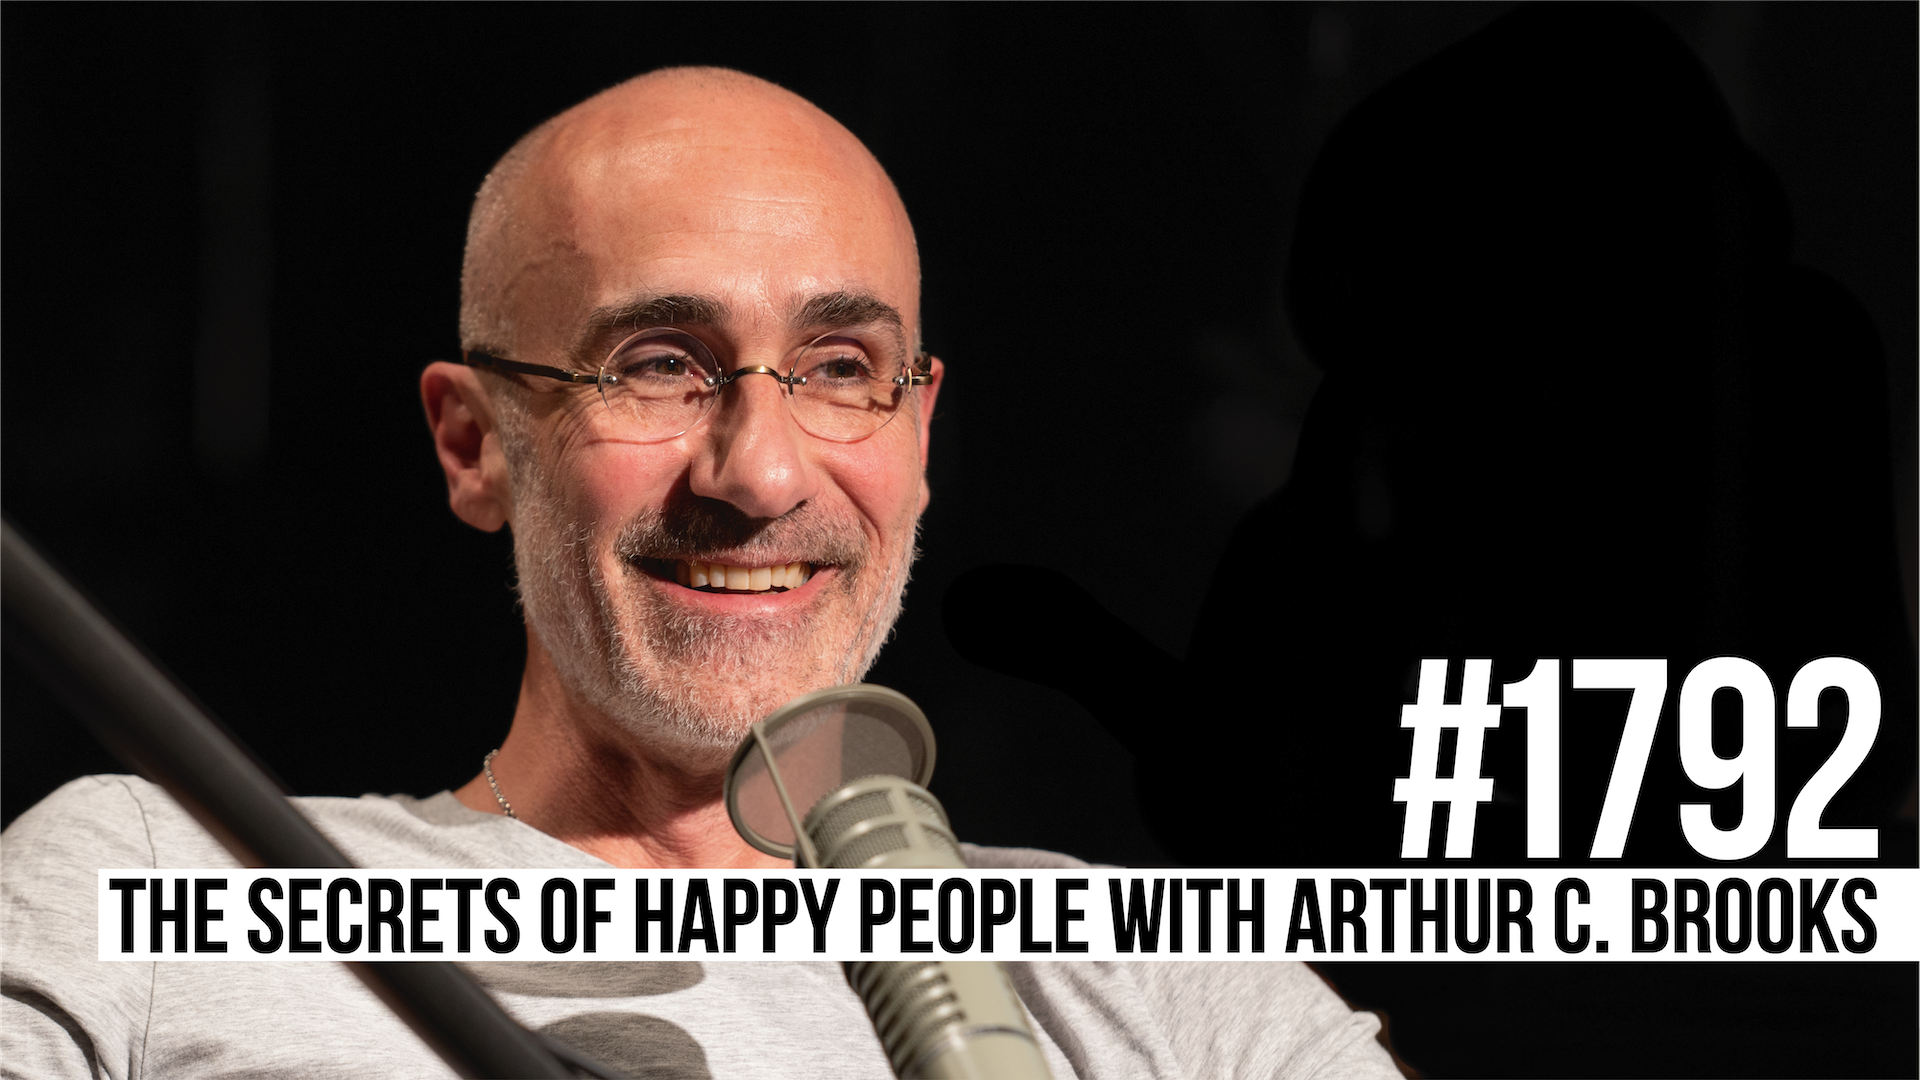 1792: The Secrets of Happy People With Arthur C. Brooks